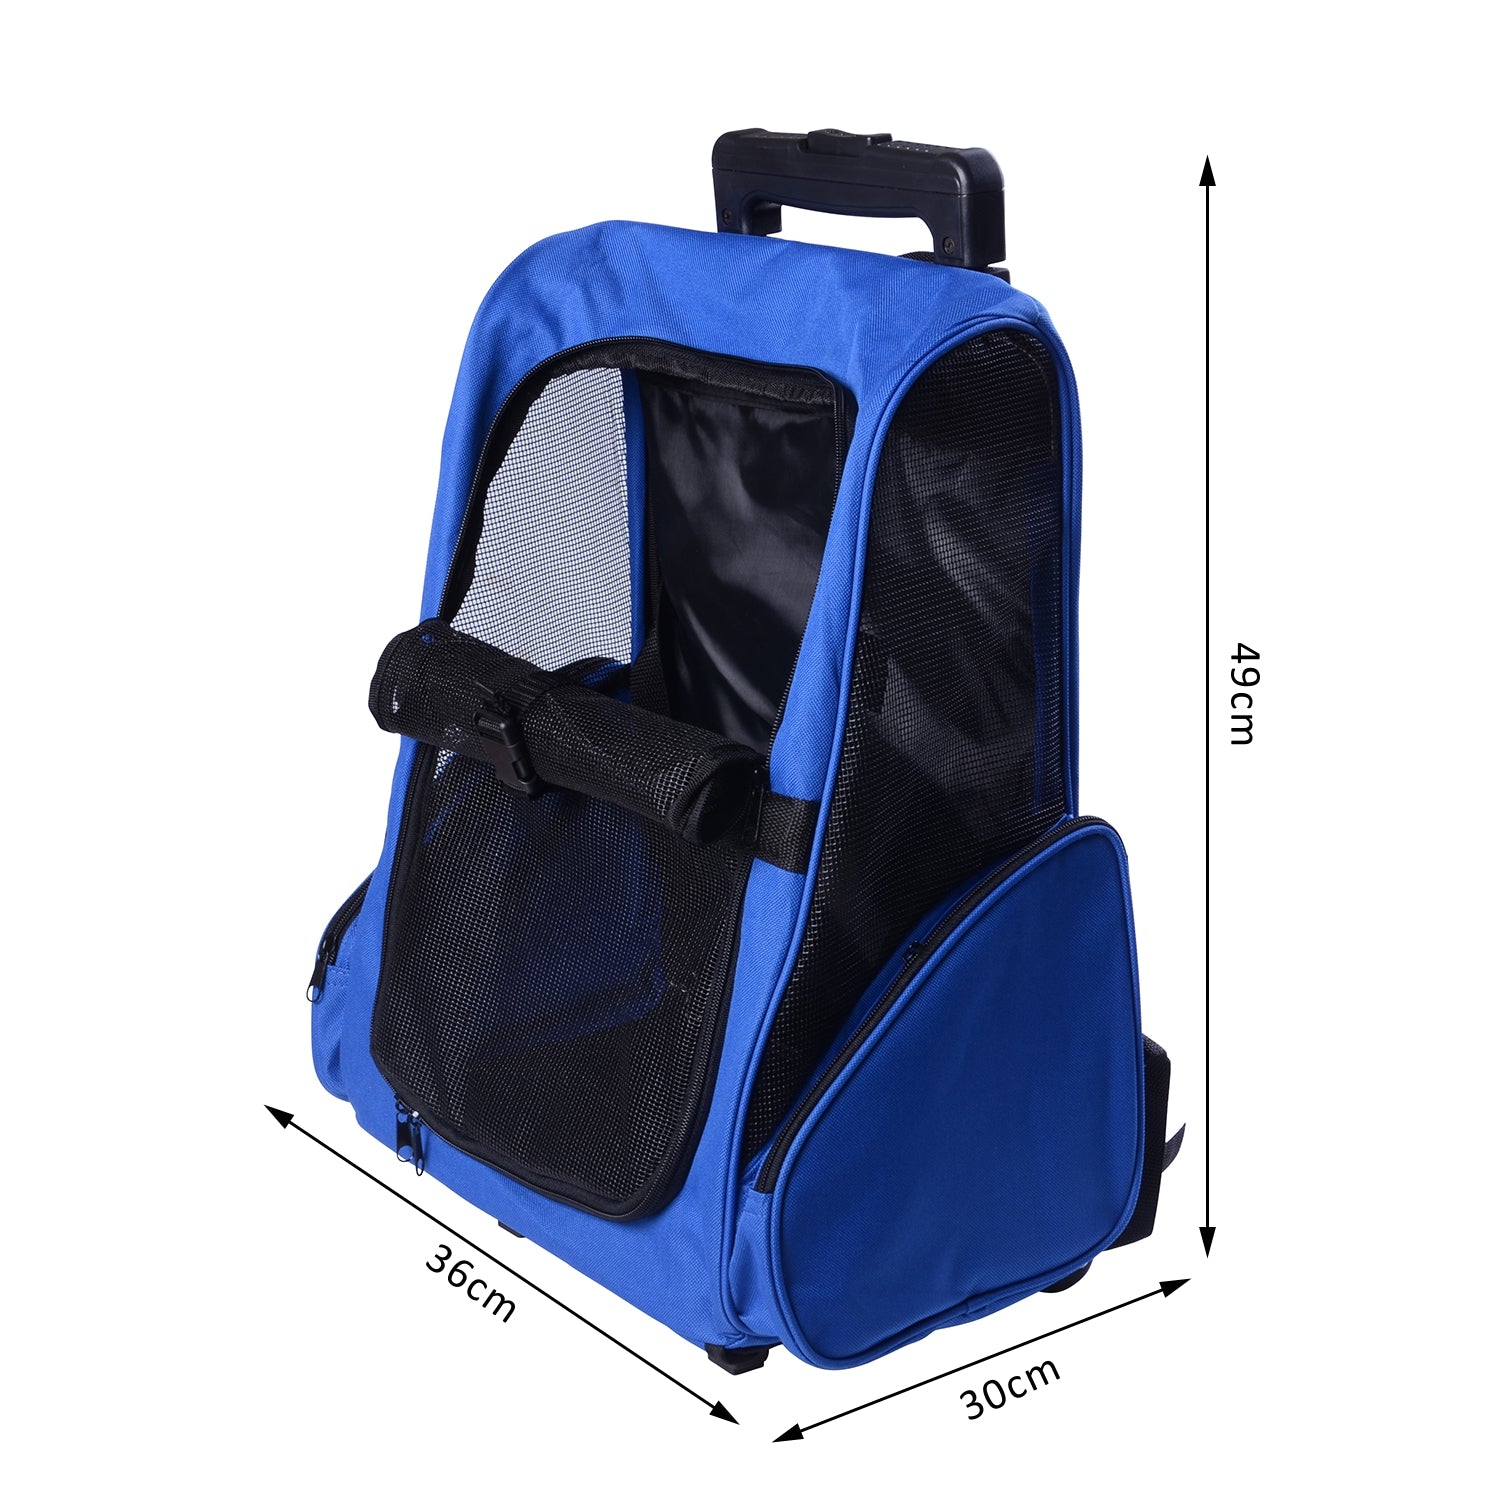 Travel Blue Backpack withTrolley, Steel Wire Frame